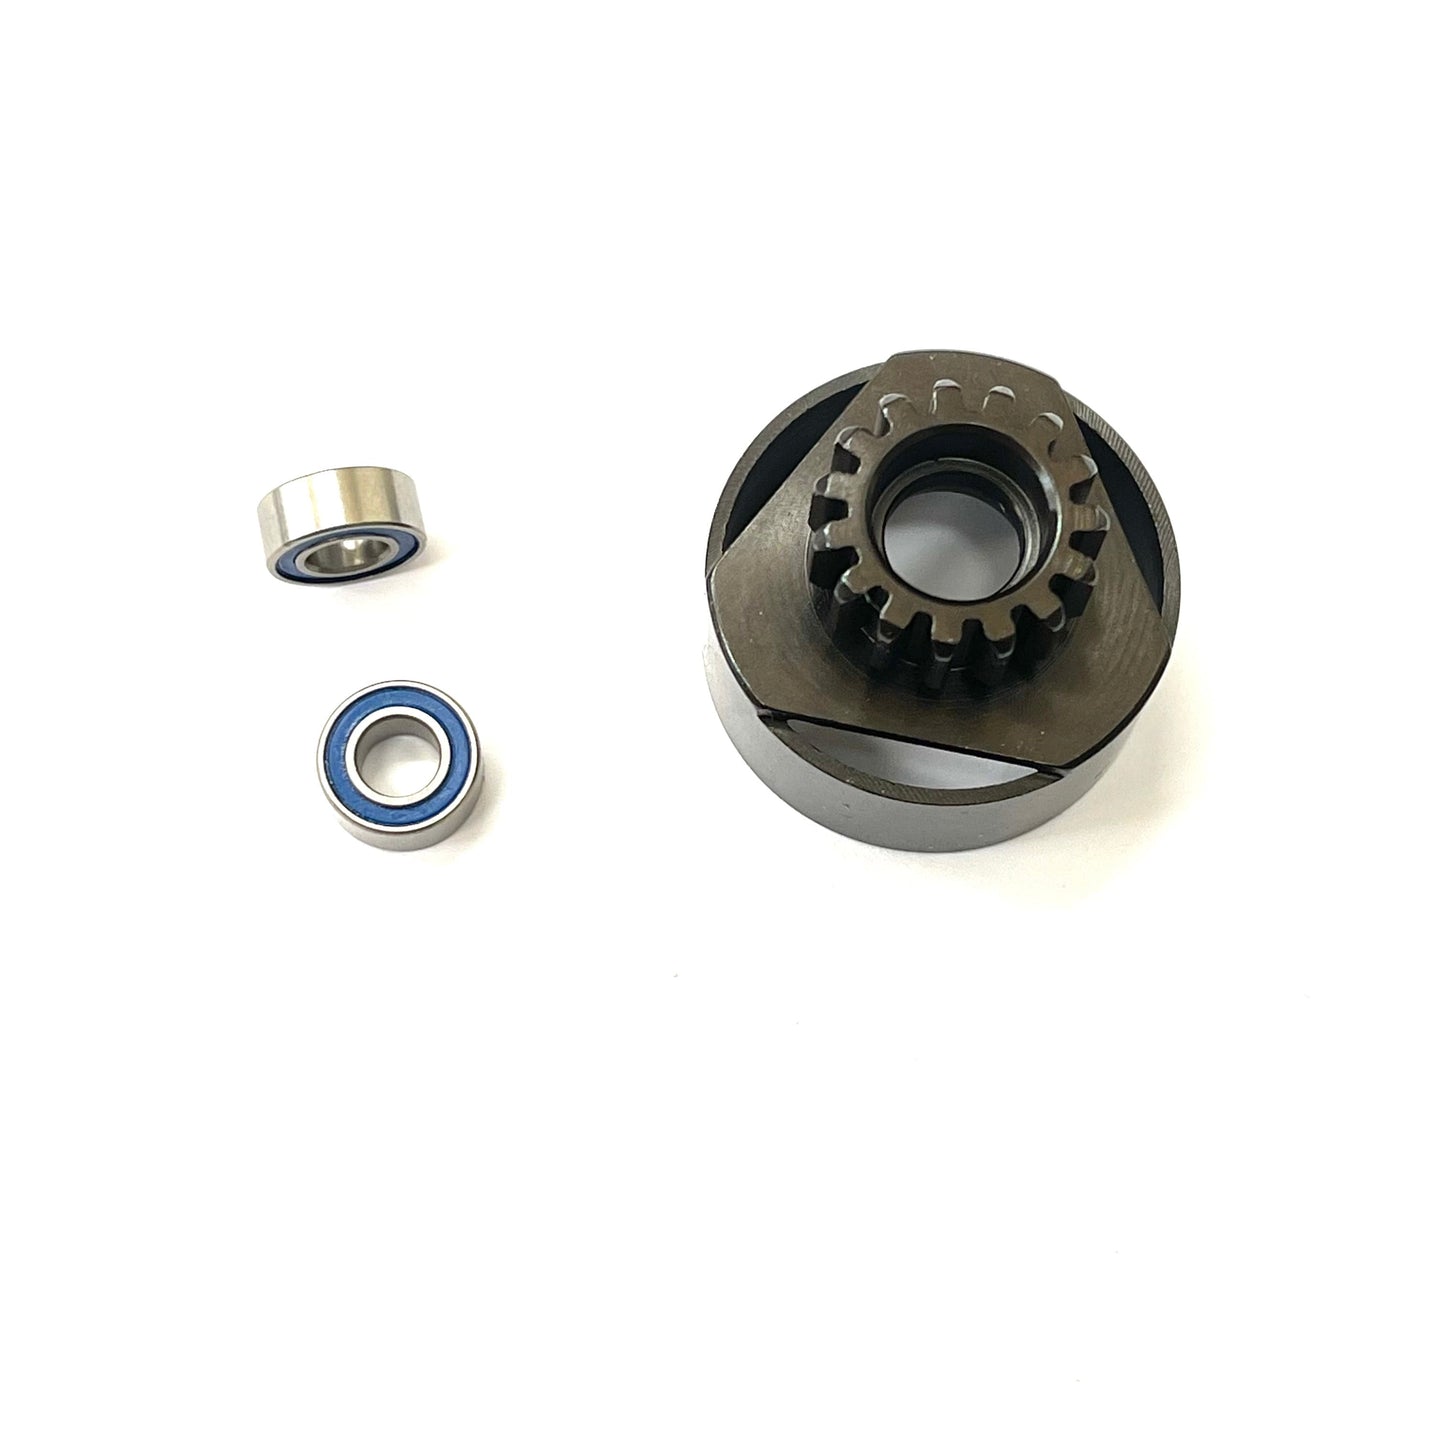 SMD Hard Steel Nitro Clutch Bell 15 tooth with Bearings.